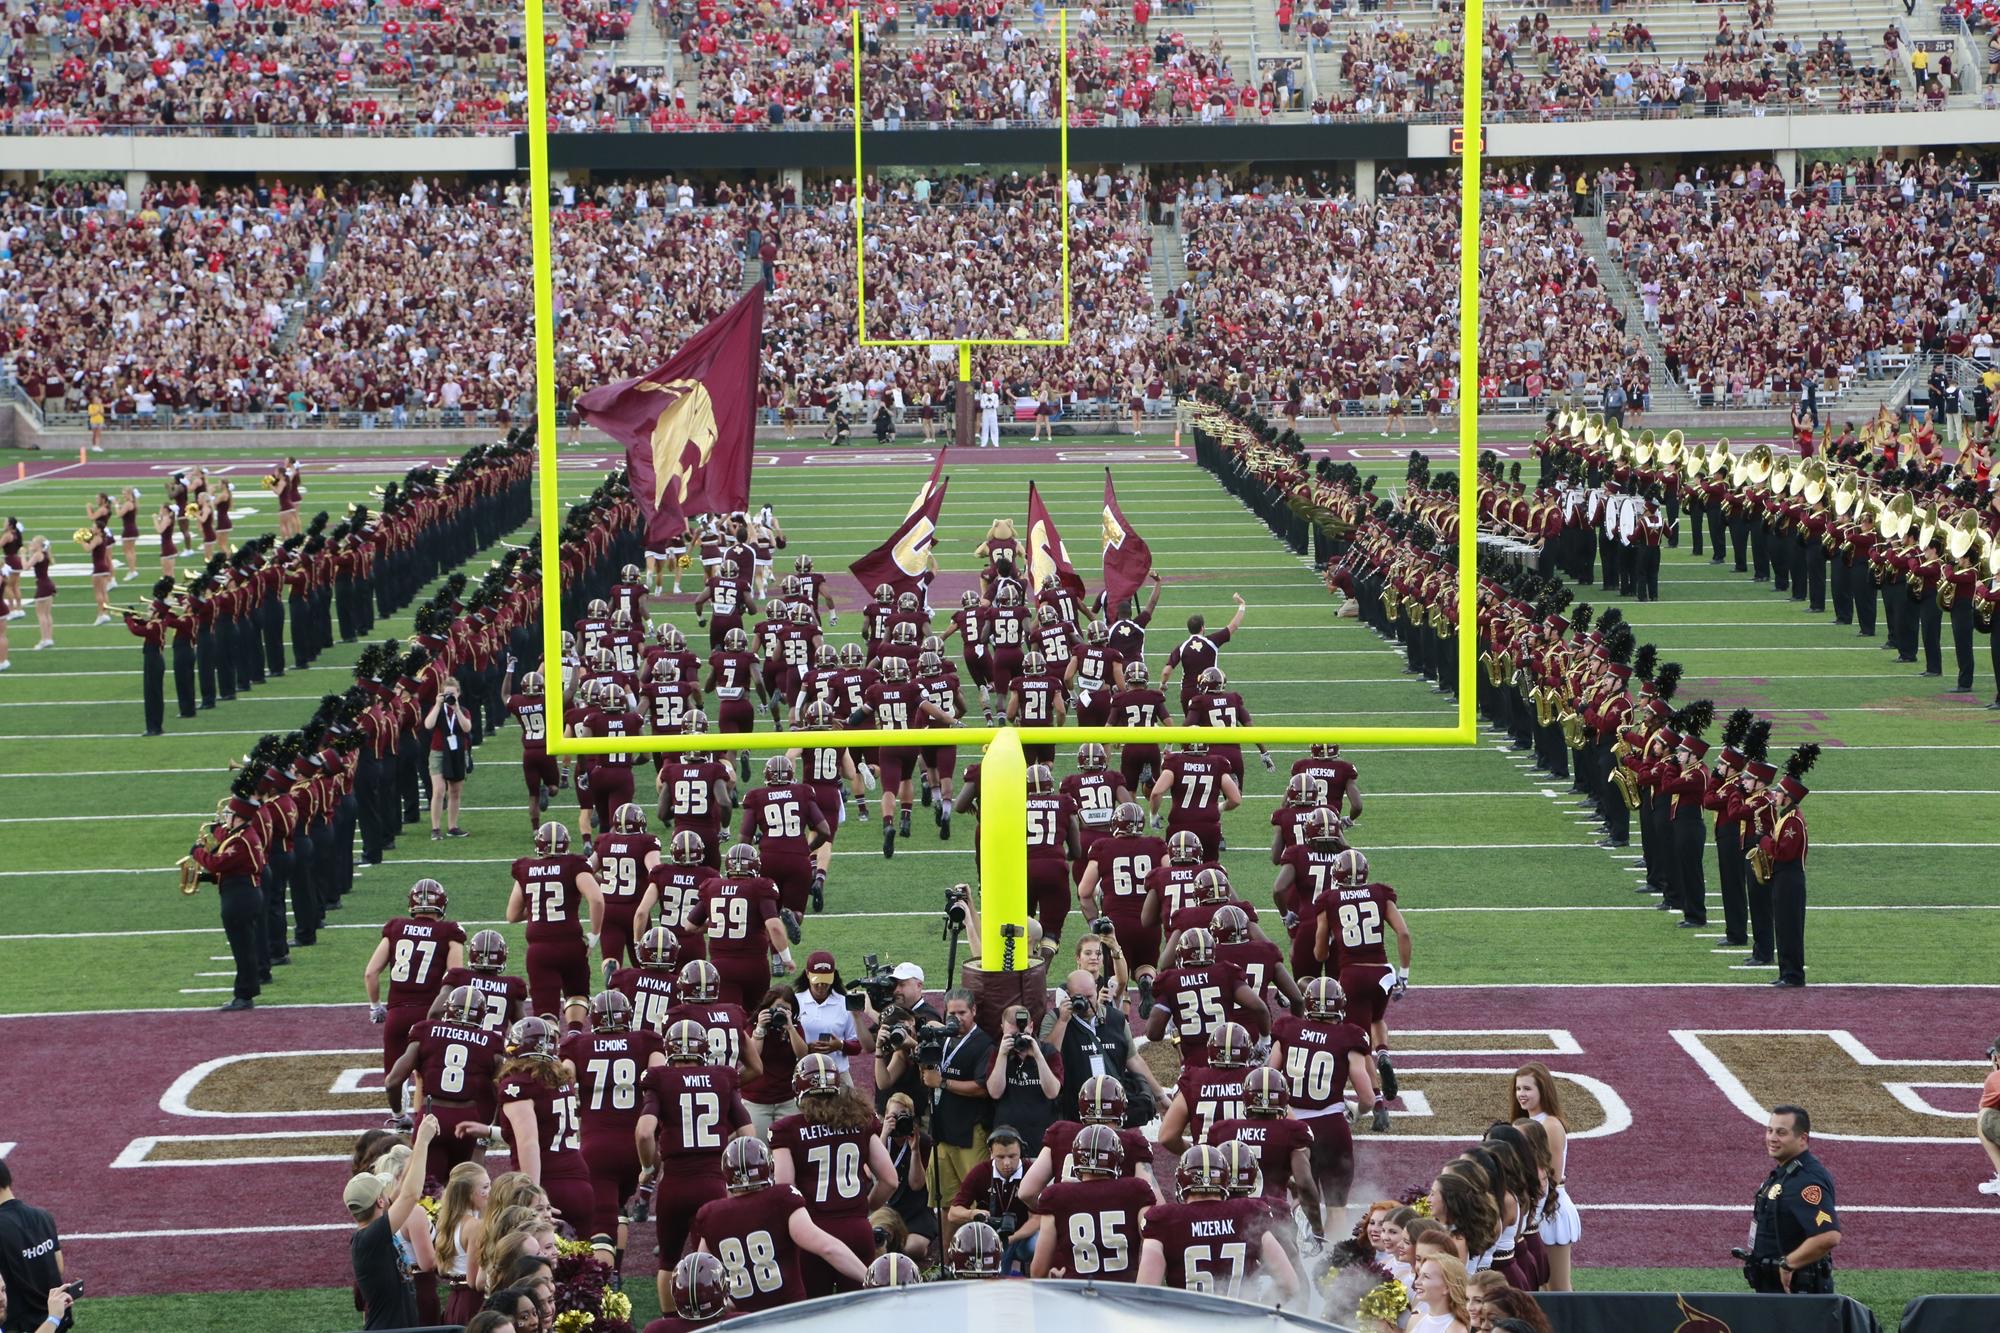 Texas State football players run onto the field inside Bobcat Stadium with the Texas State band and cheer squads tunneling them towards the goalpost as fans fill the stands.